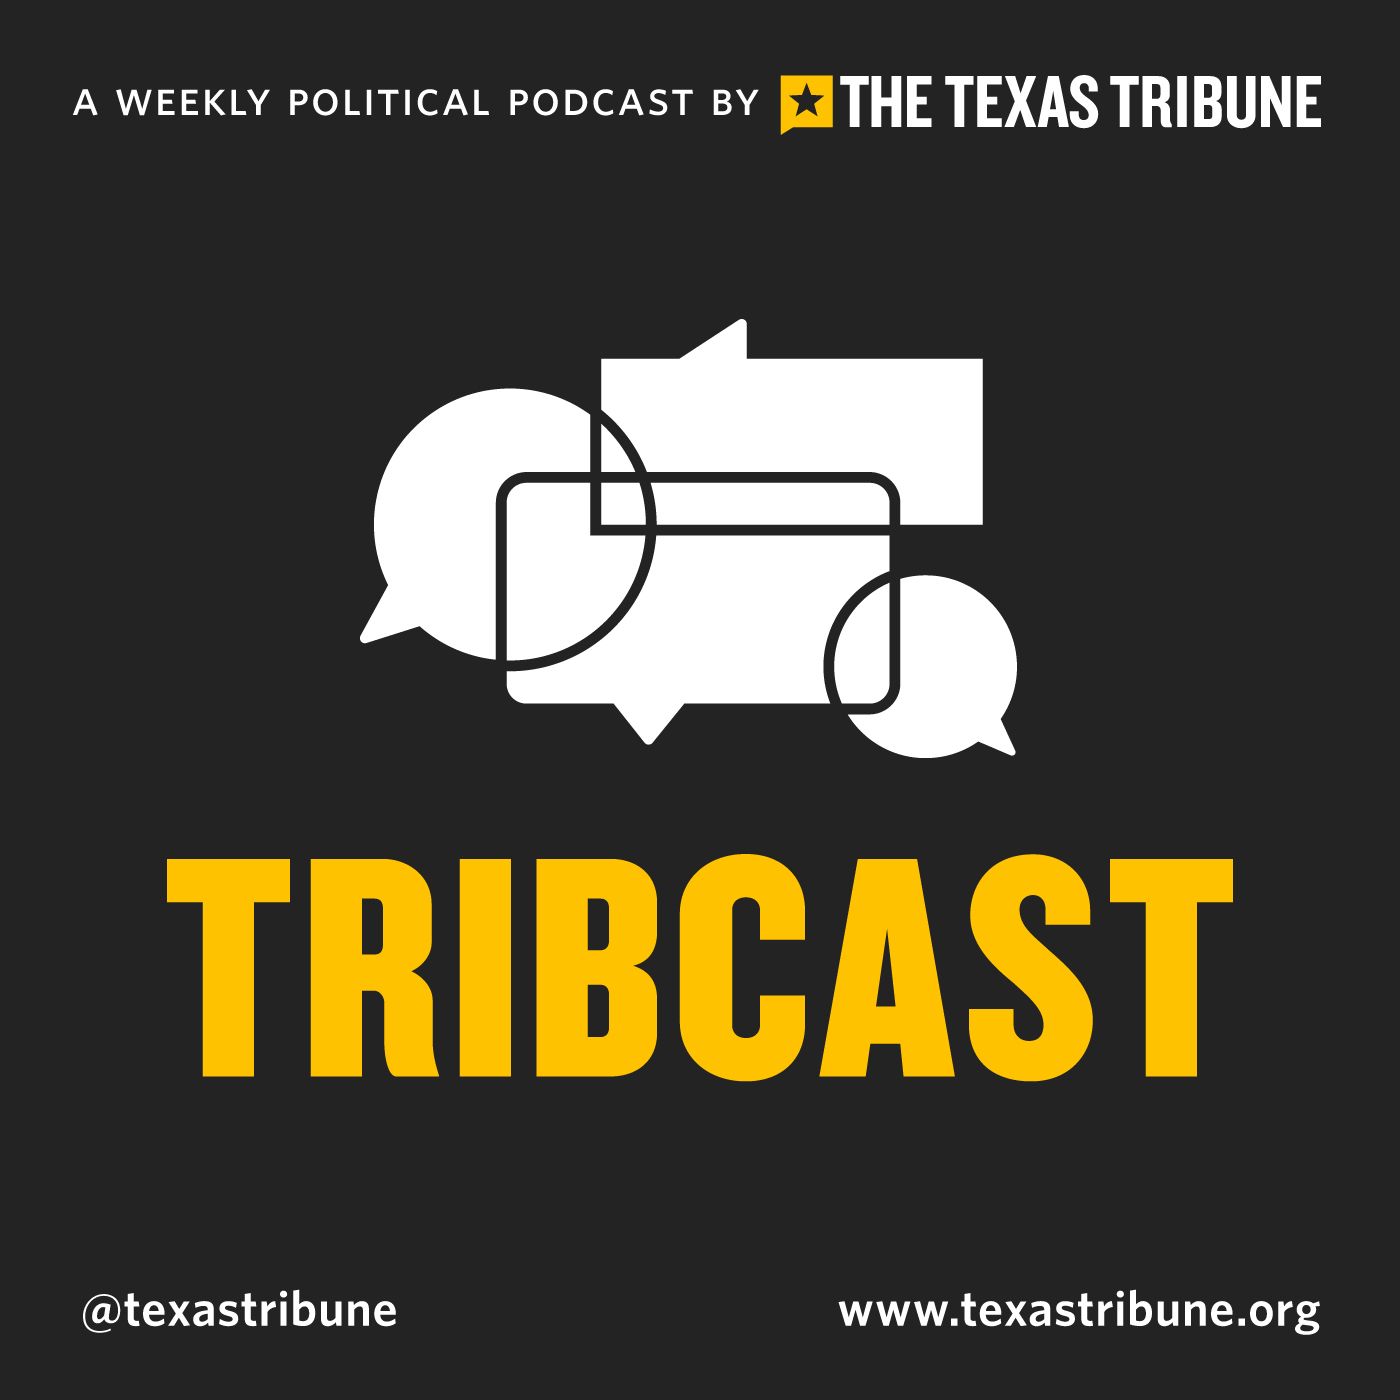 TribCast: Gun Bills and Texans Shooting for the White House